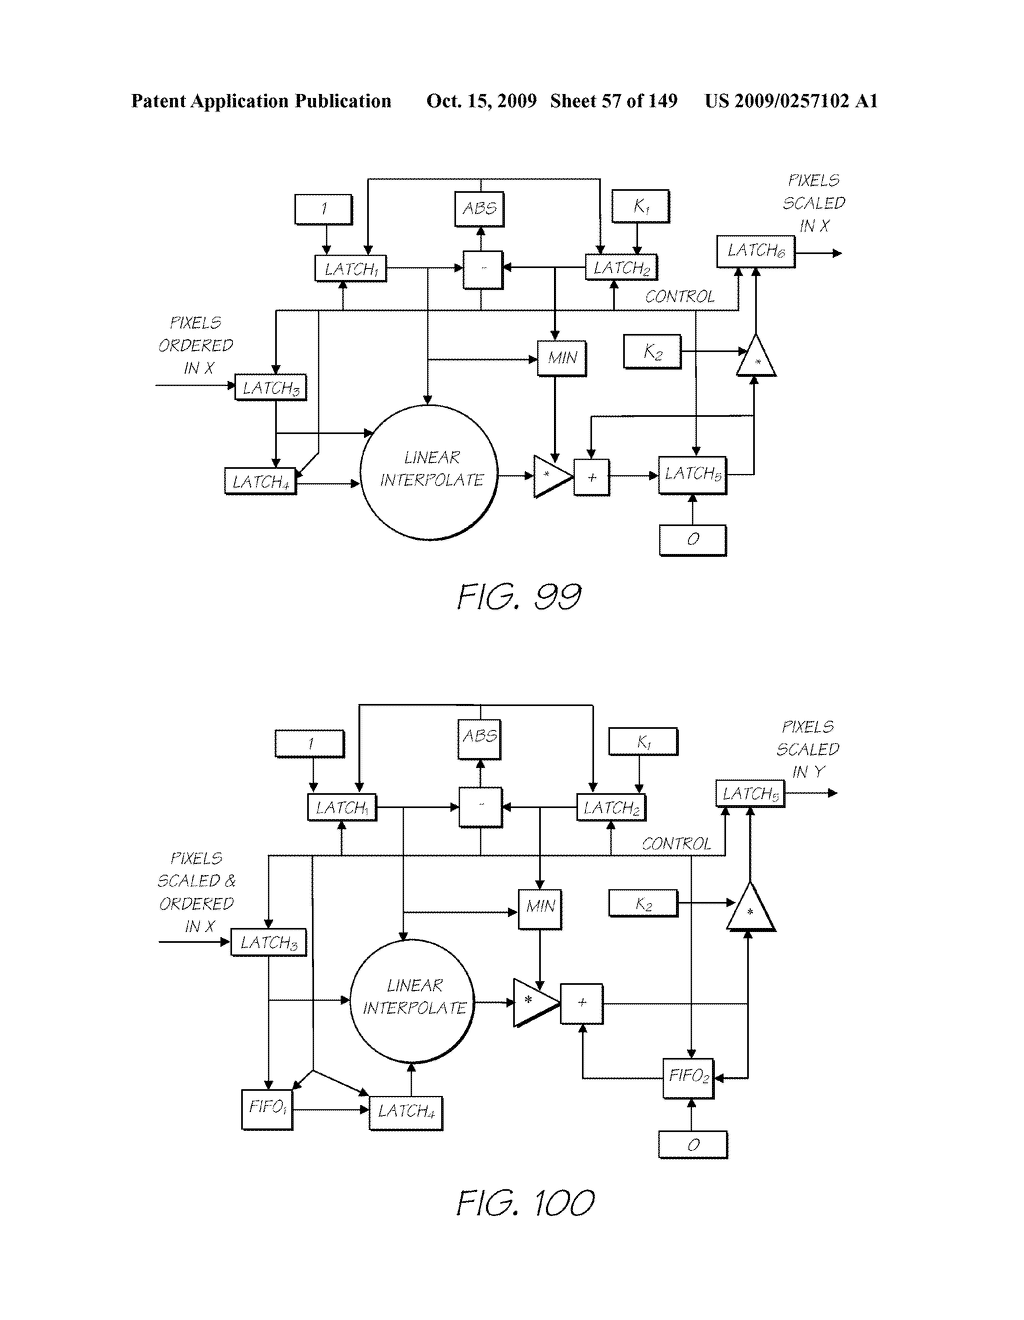 IMAGE PROCESSING APPARATUS HAVING CARD READER FOR APPLYING EFFECTS STORED ON A CARD TO A STORED IMAGE - diagram, schematic, and image 58